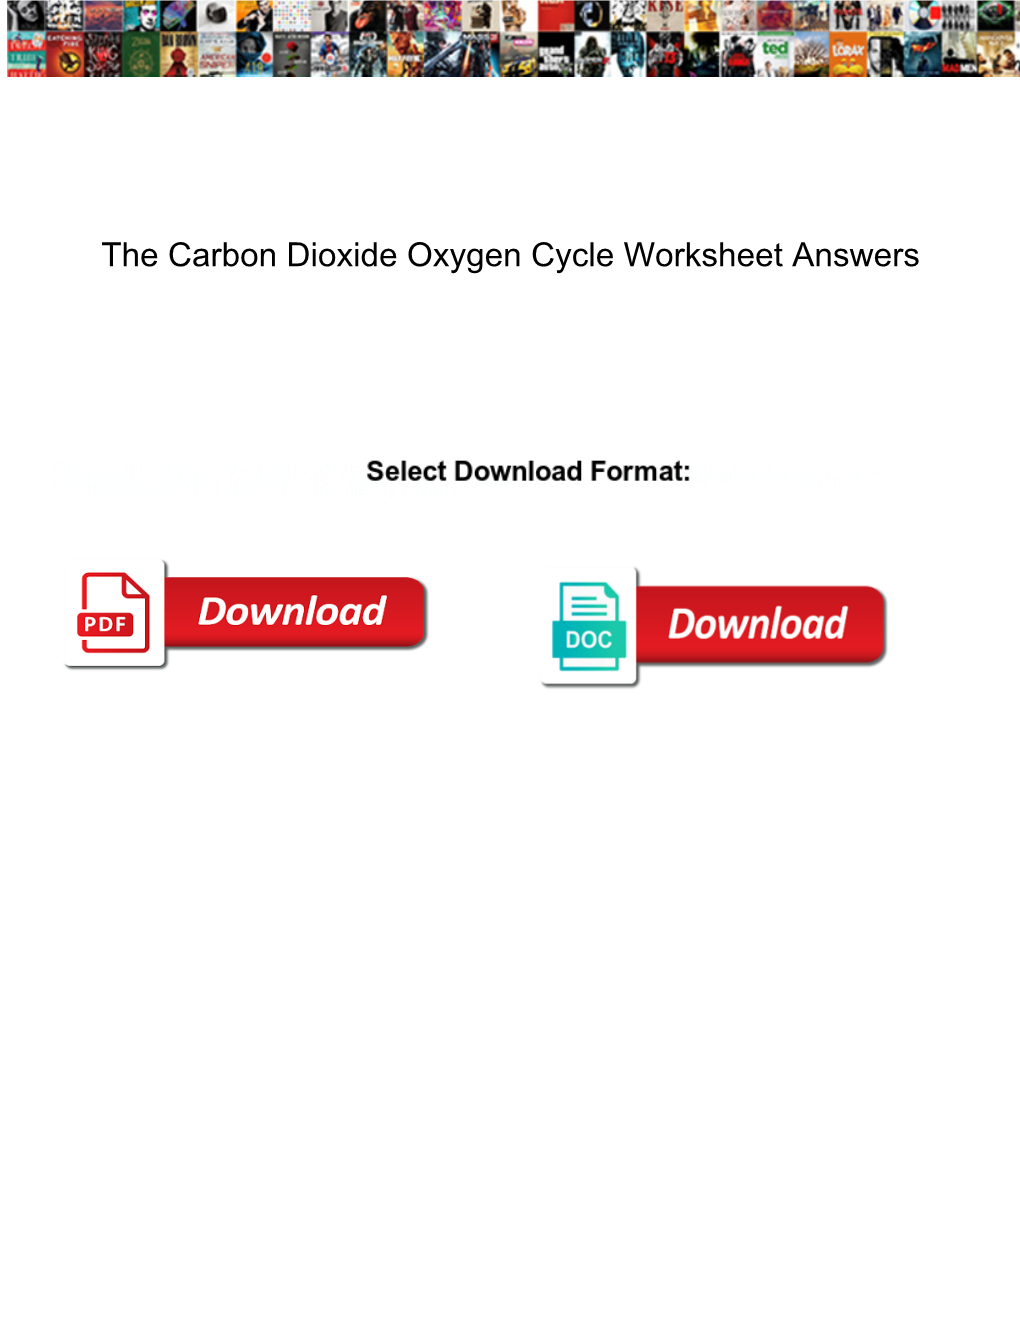 The Carbon Dioxide Oxygen Cycle Worksheet Answers